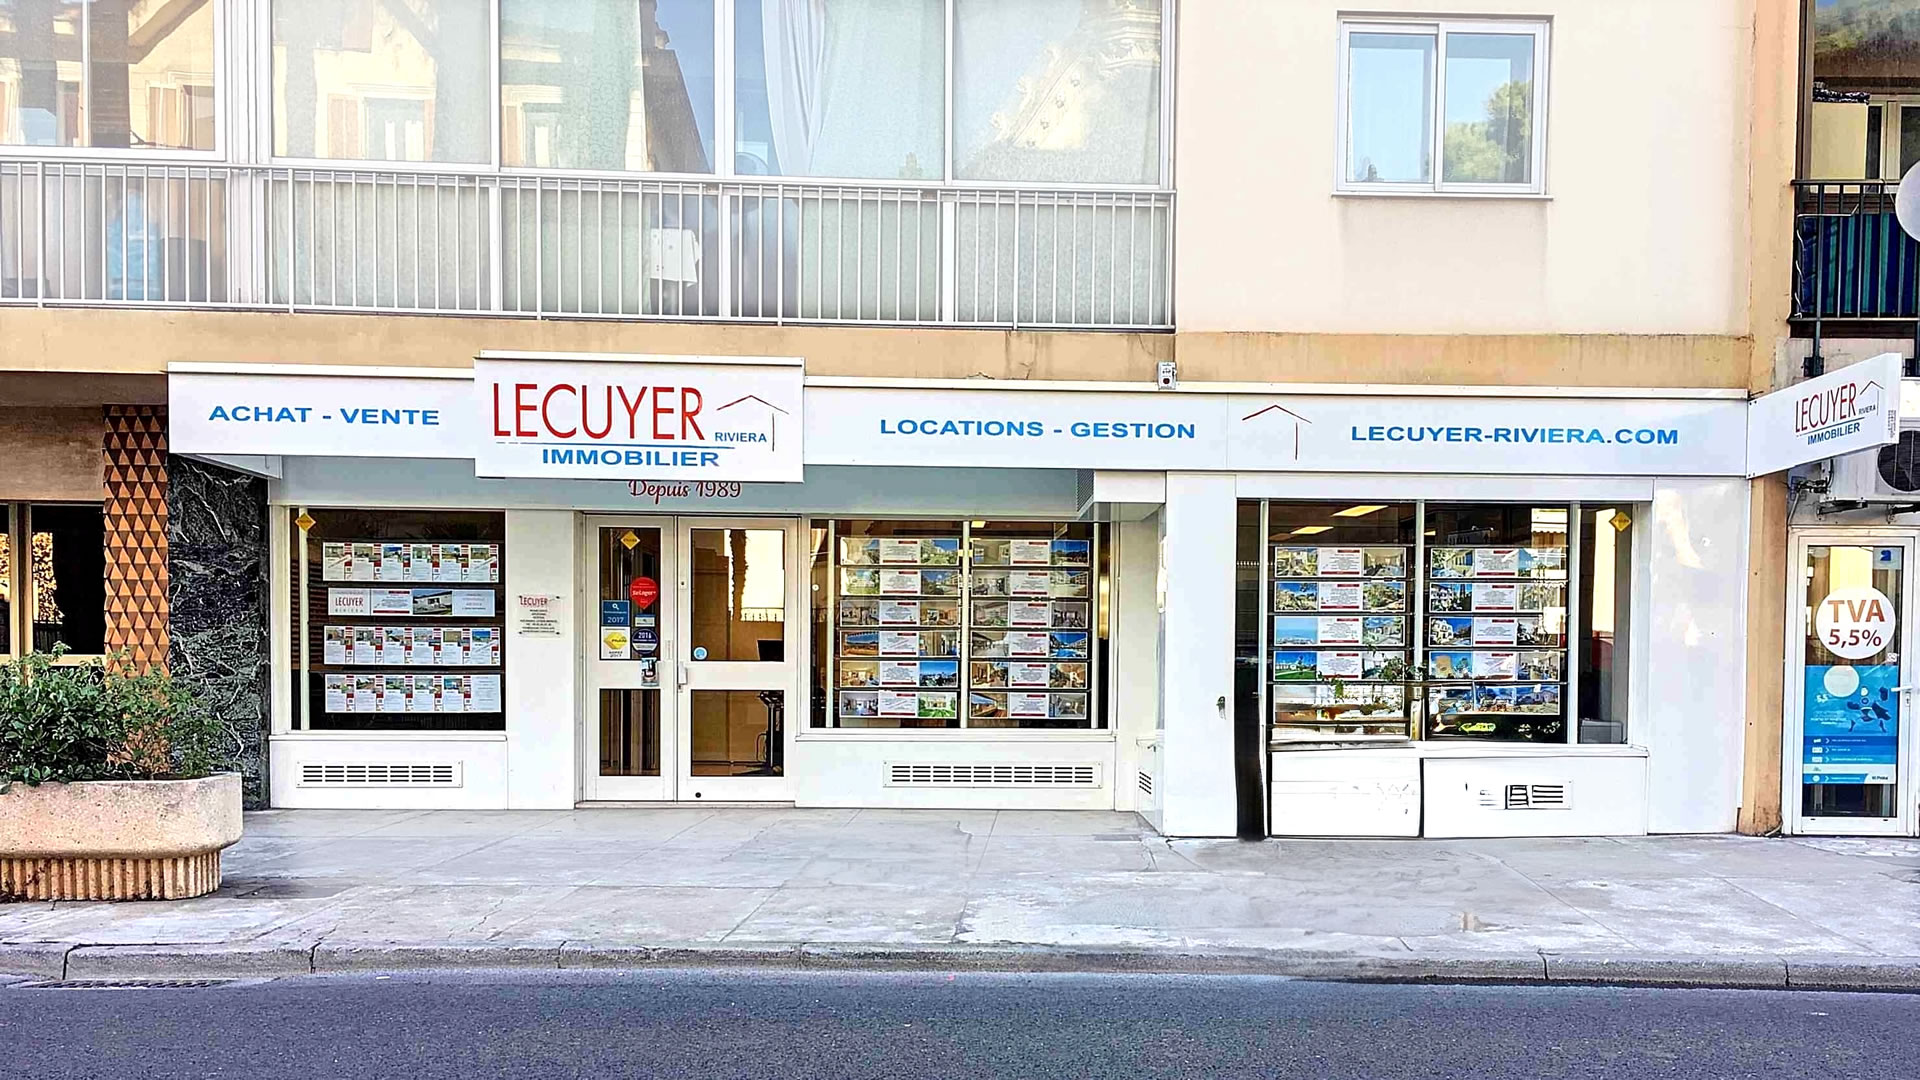 Lecuyer Riviera Immobilier